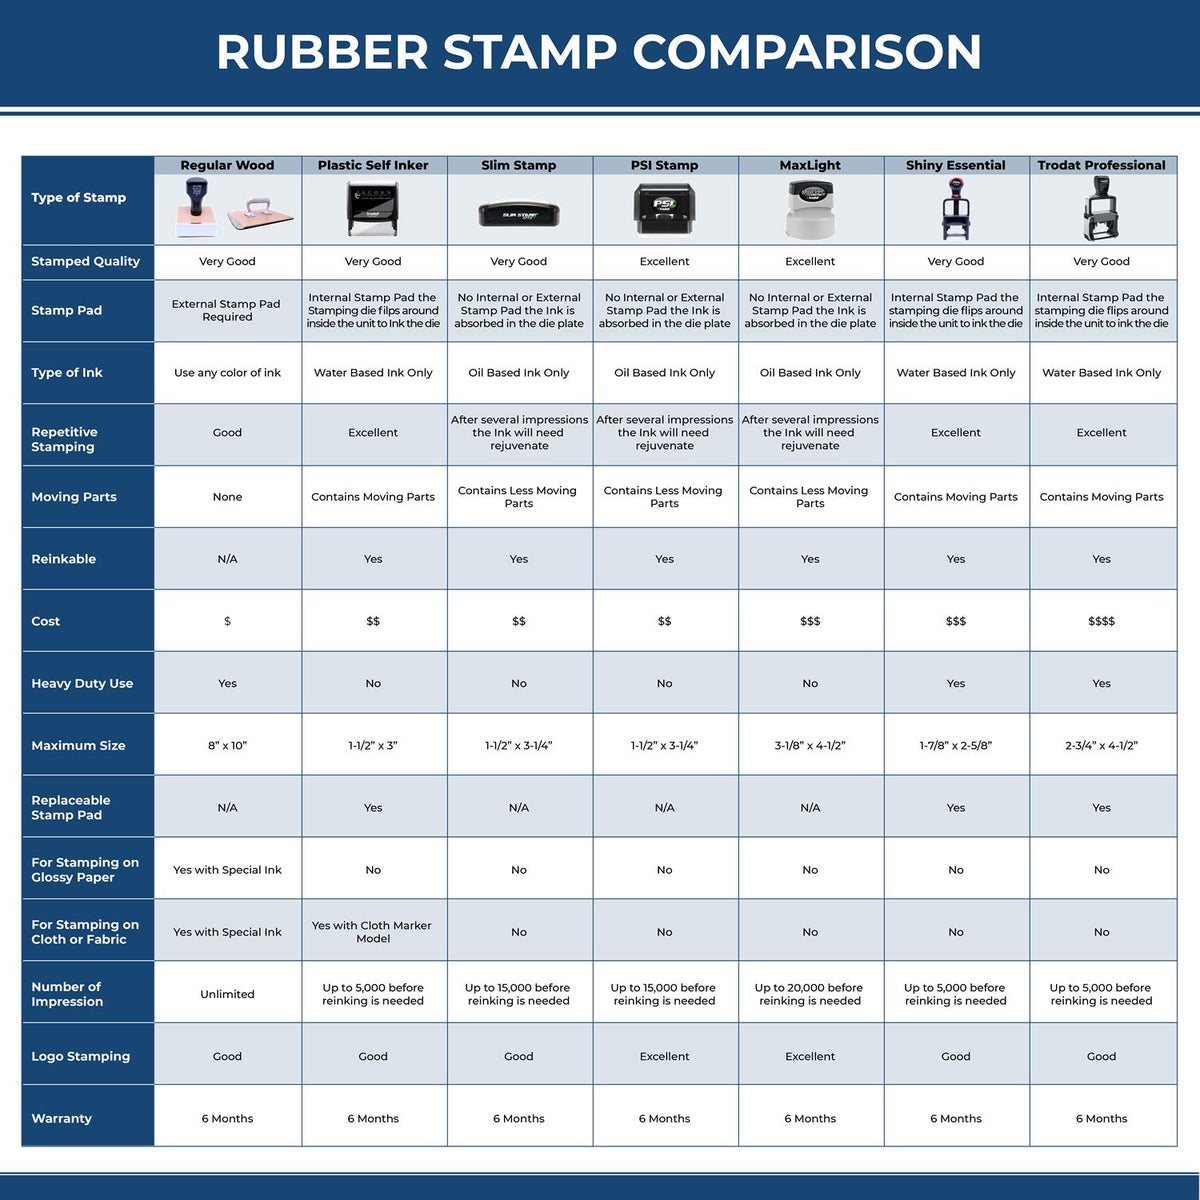 A comparison chart for the different types of mount models available for the Premium MaxLight Pre-Inked North Carolina Engineering Stamp.